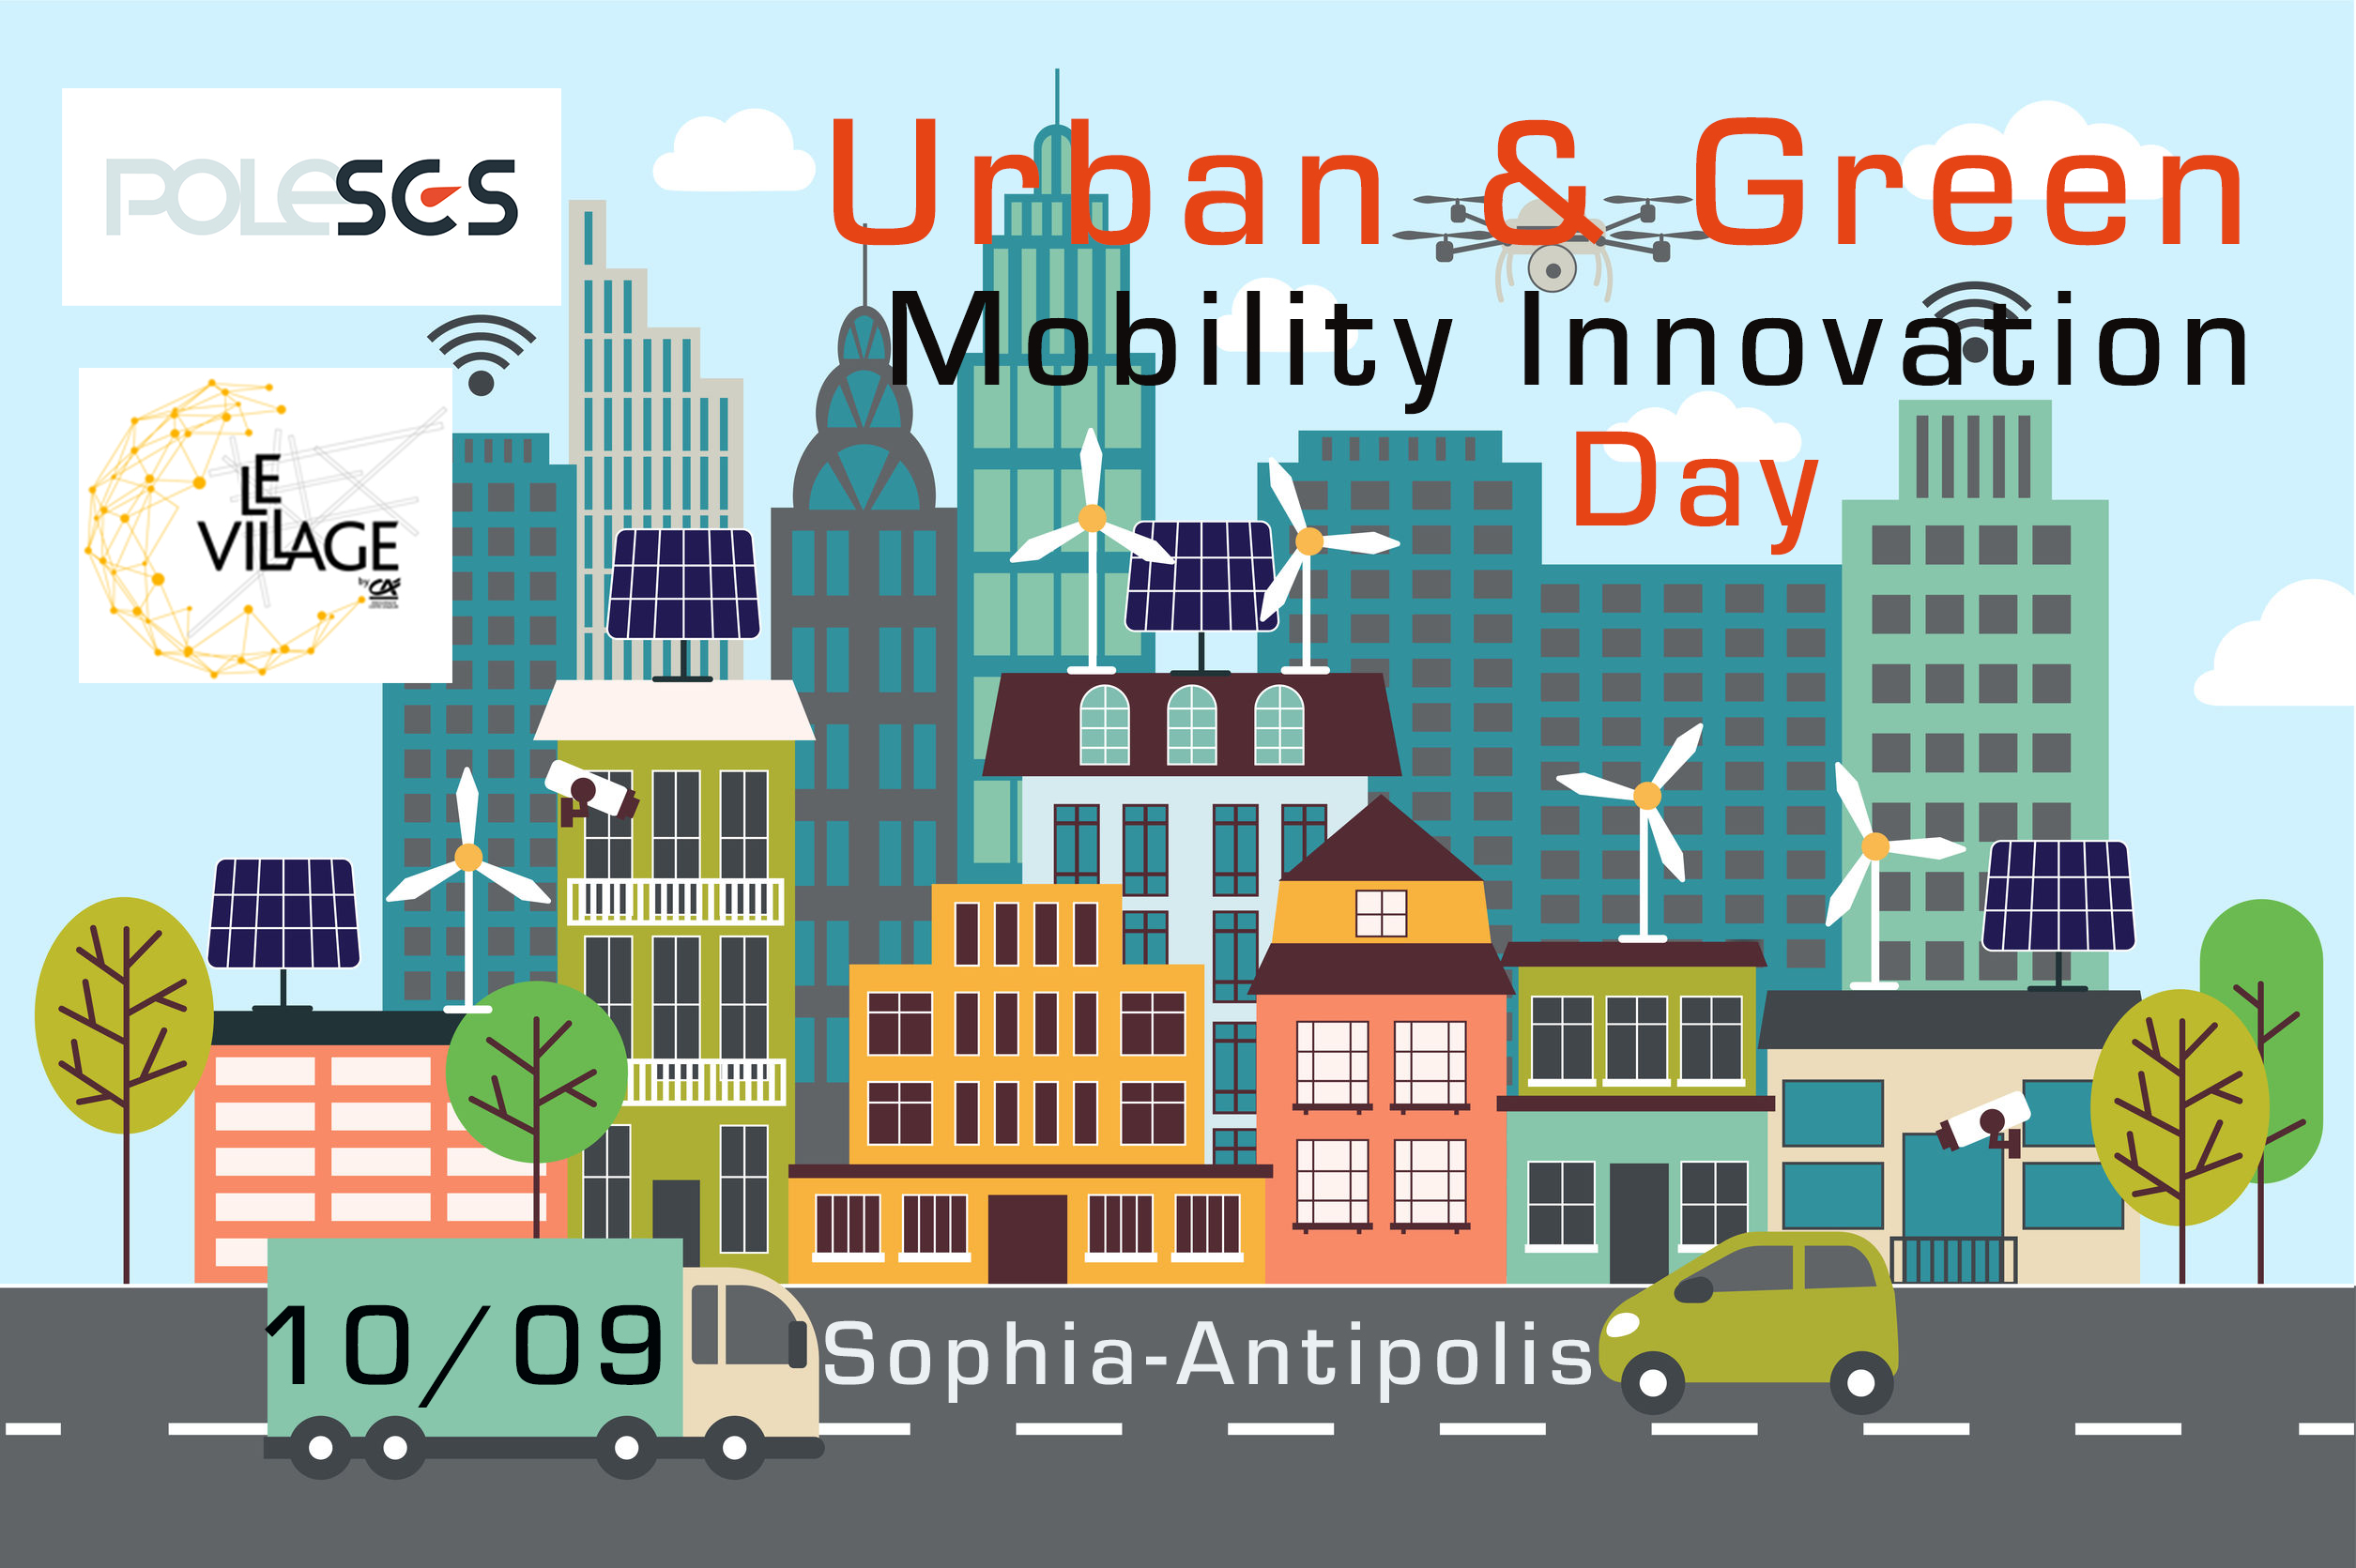 Urban & Green Mobility Innovation Day